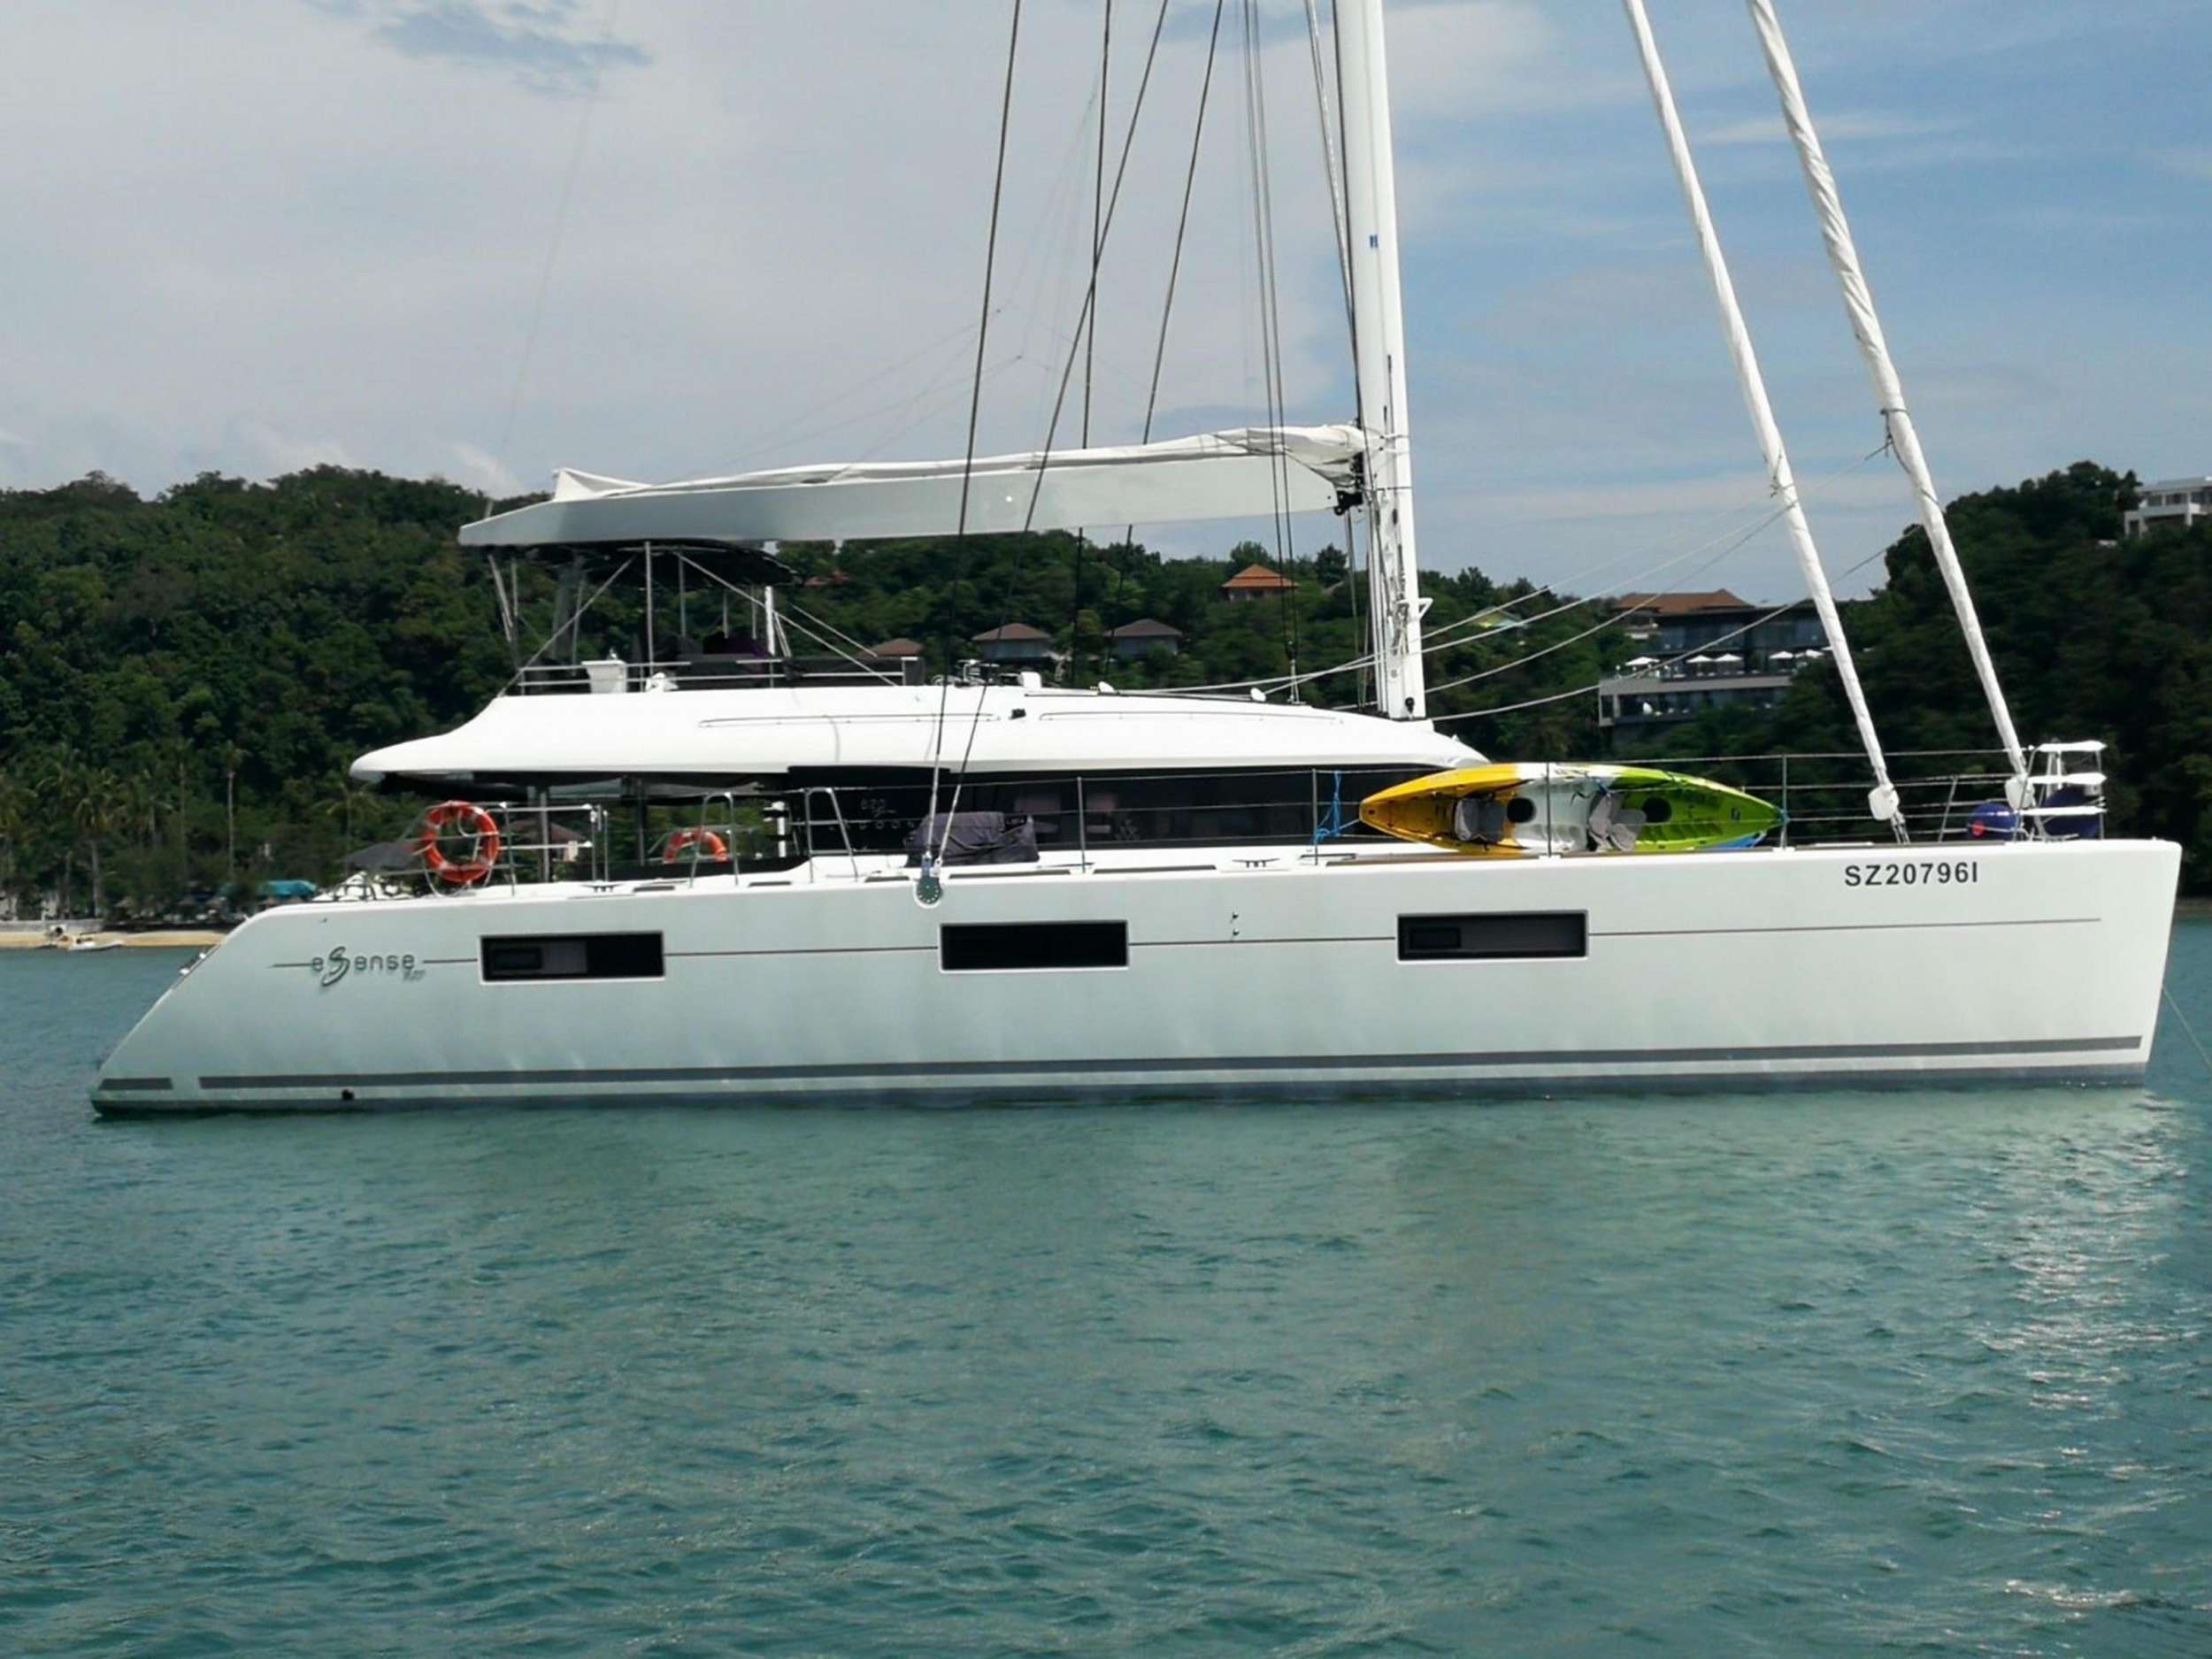 Six Degrees - Yacht Charter Malaysia & Boat hire in SE Asia 1